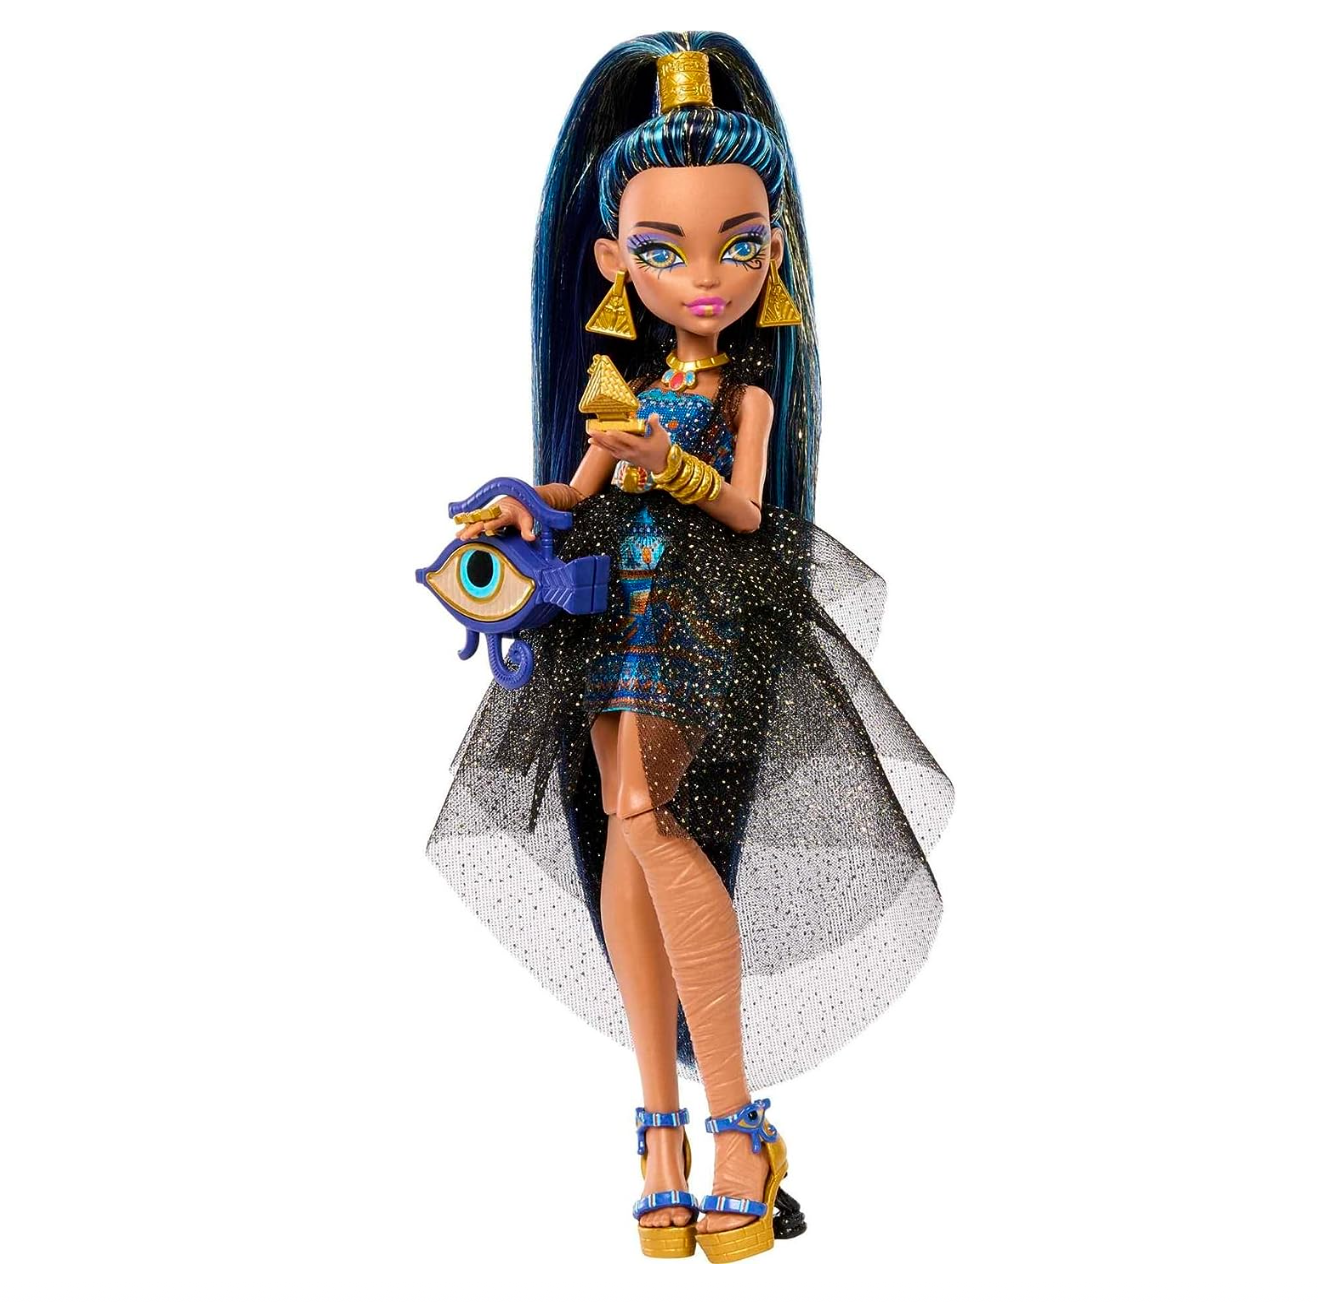 Monster High Clawdeen Wolf Doll in Monster Ball Party Fashion with Themed Accessories Like Balloonsのコピーp